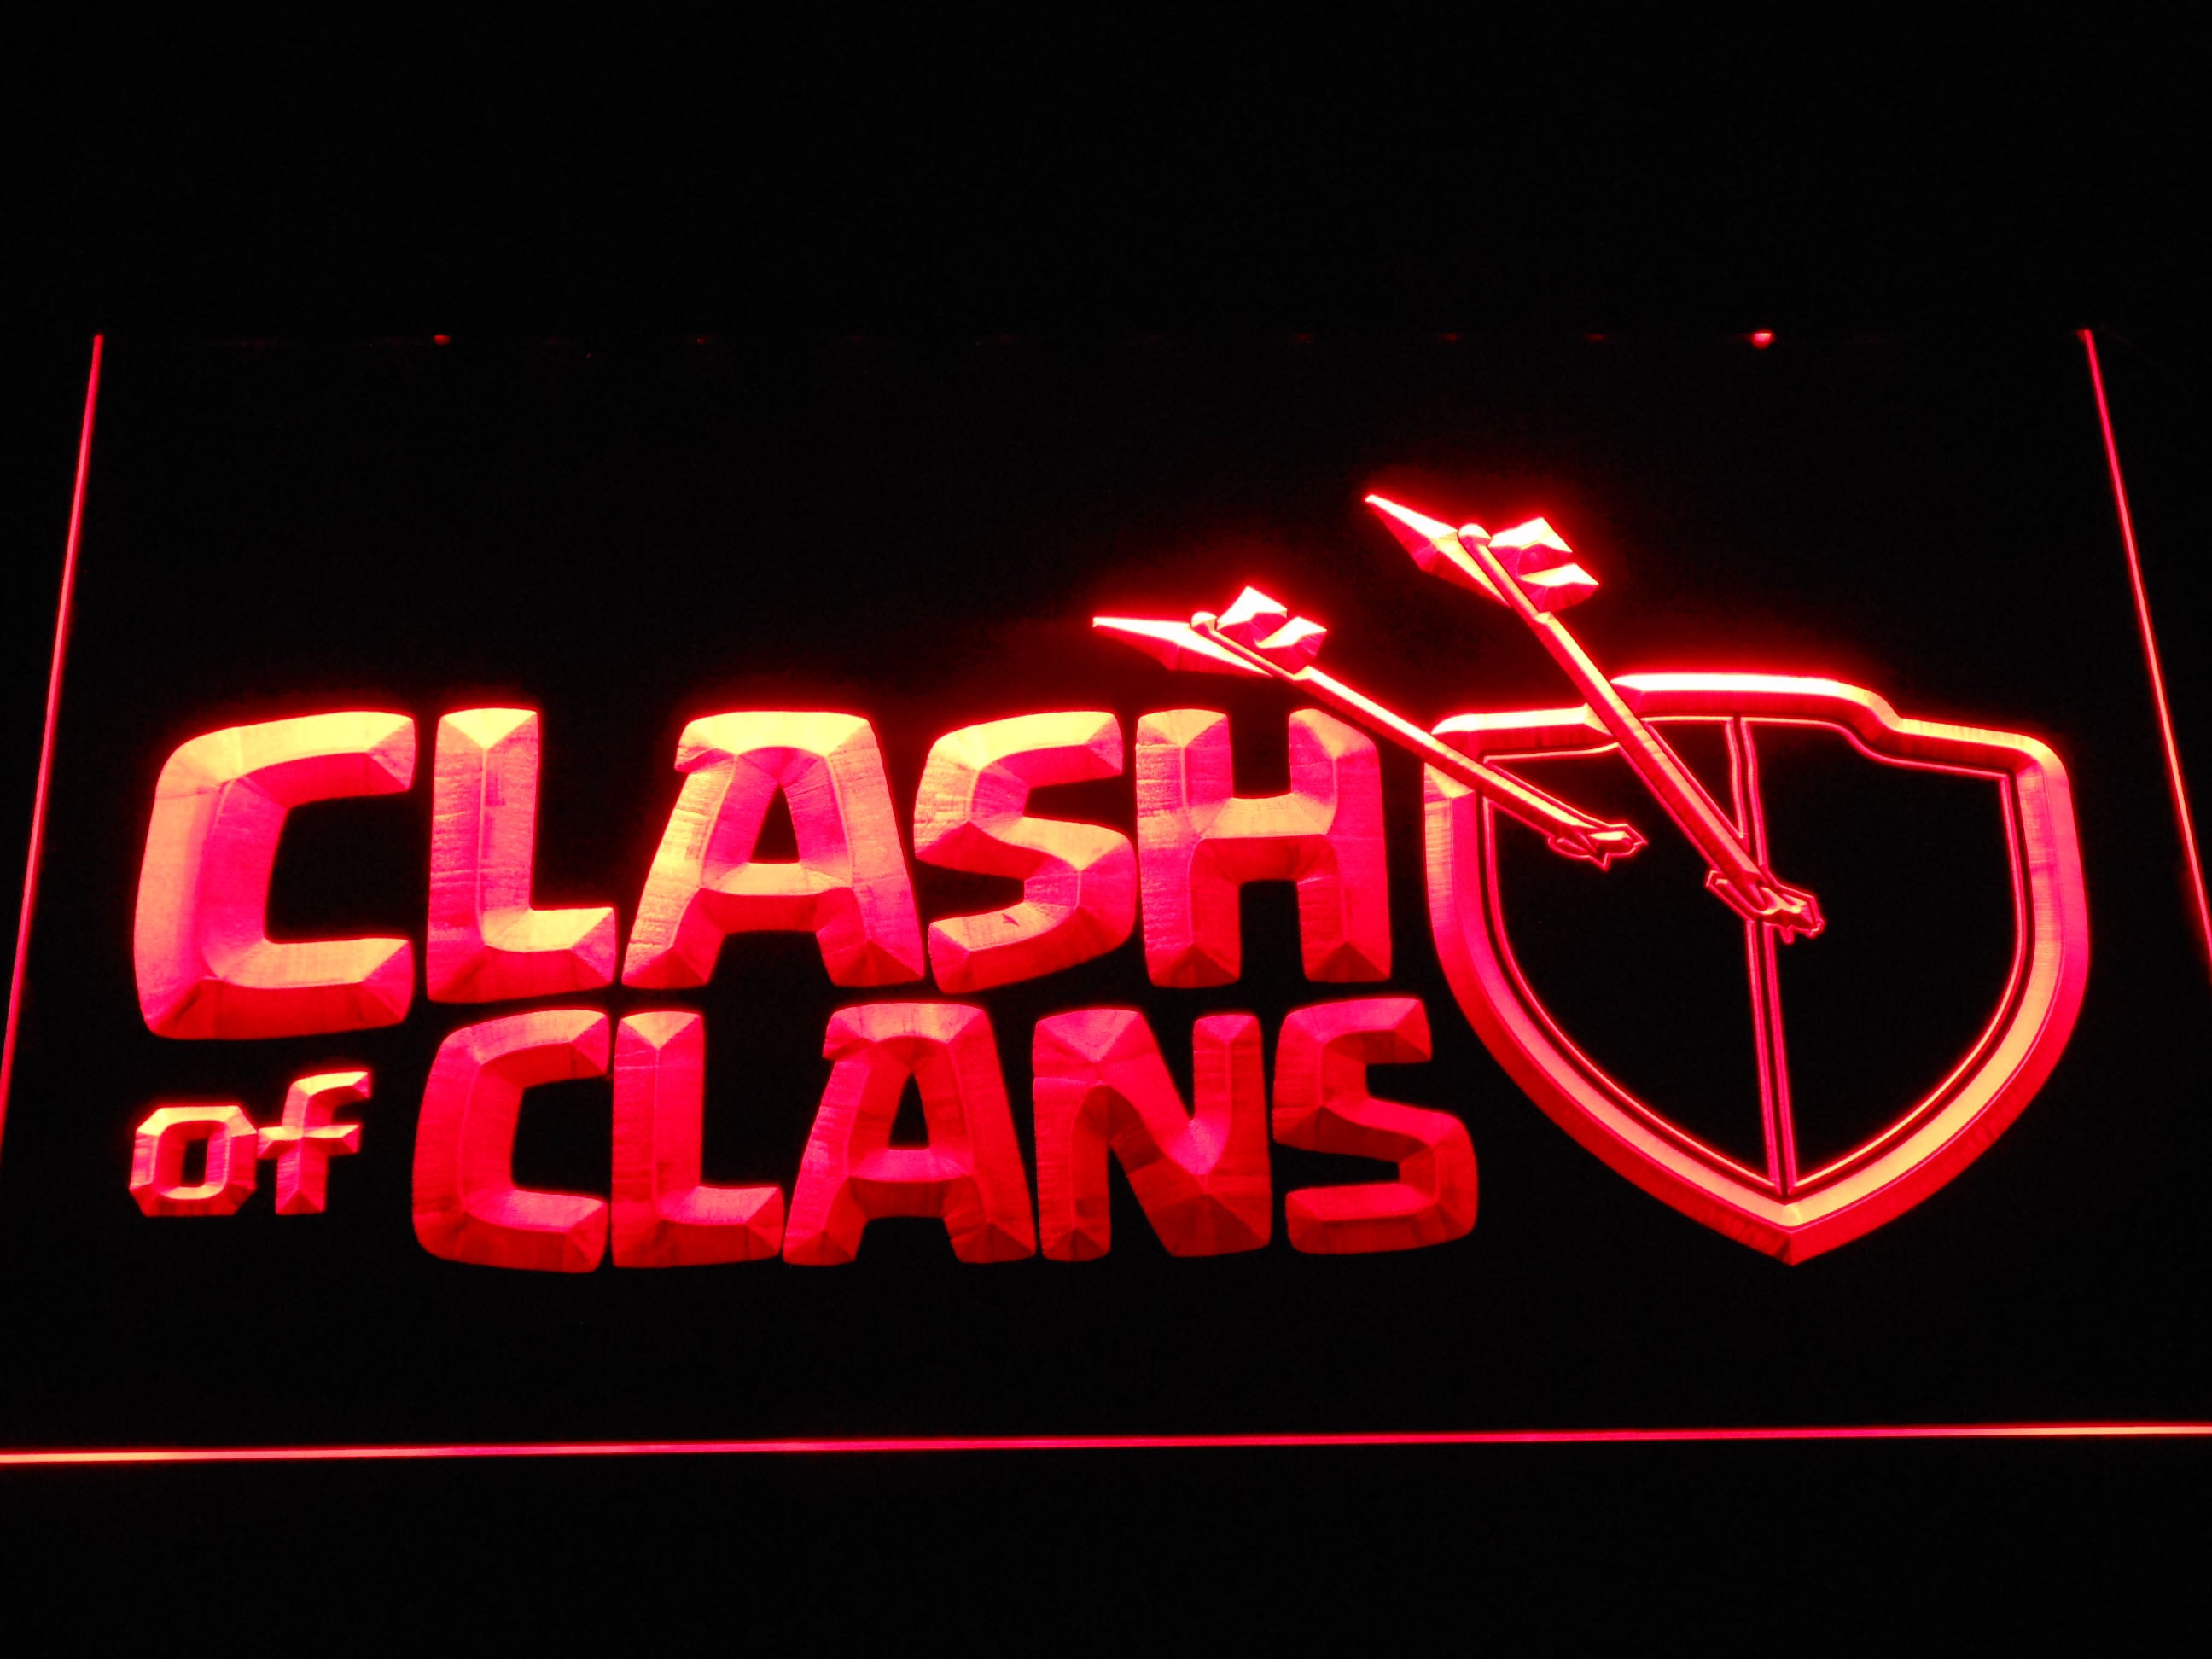 Clash Of Clans Strategy War Game Neon Light LED Sign